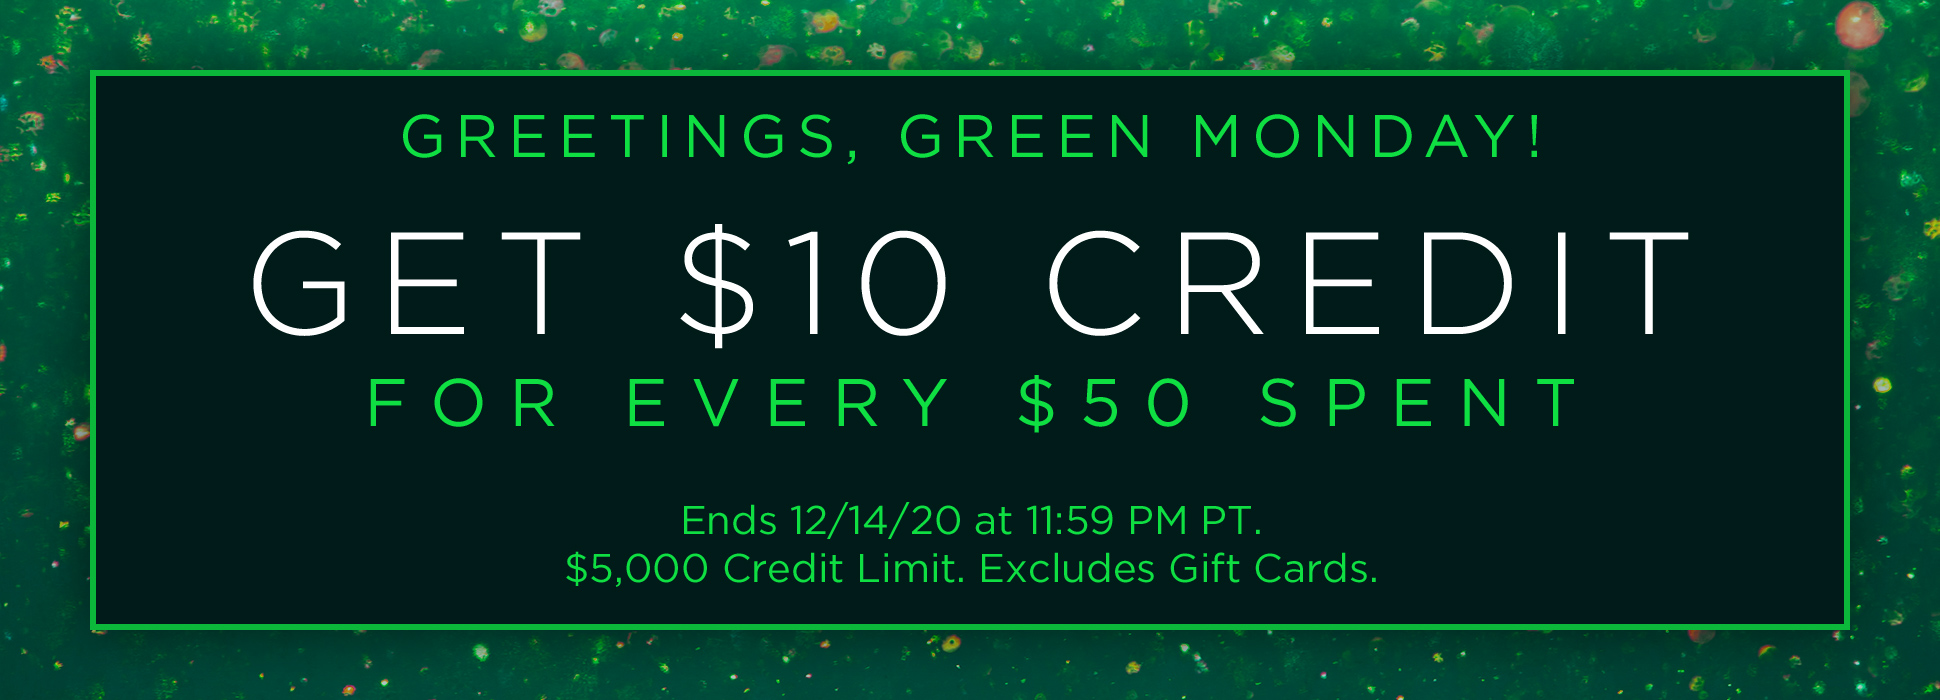 Green Monday sitewide (banners)